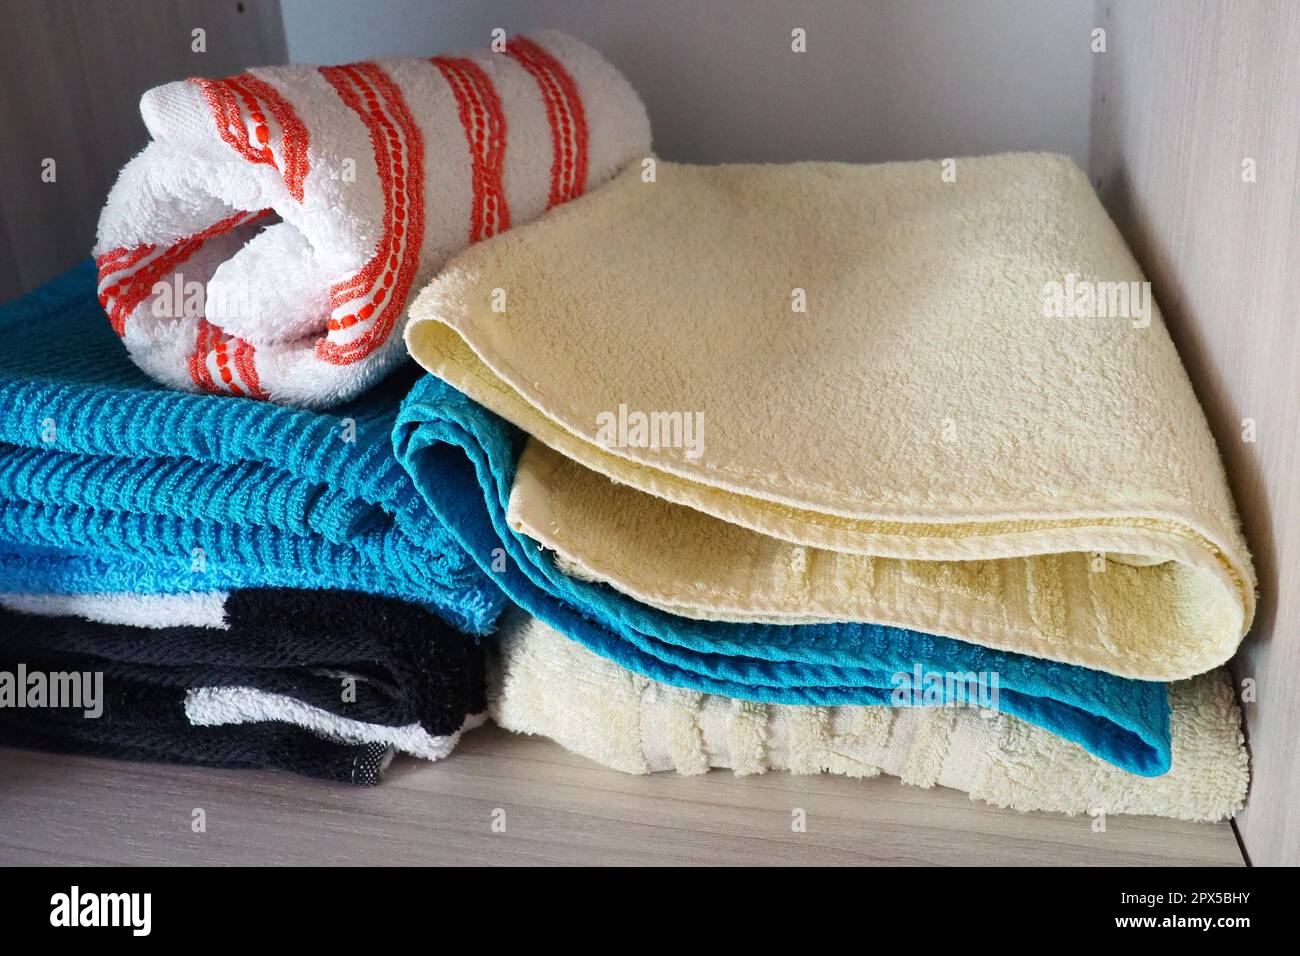 Towels on a shelf in a white cabinet. Clean ironed pink, yellow, blue towels folded in a pile. Organization of household items in the bathroom or clos Stock Photo